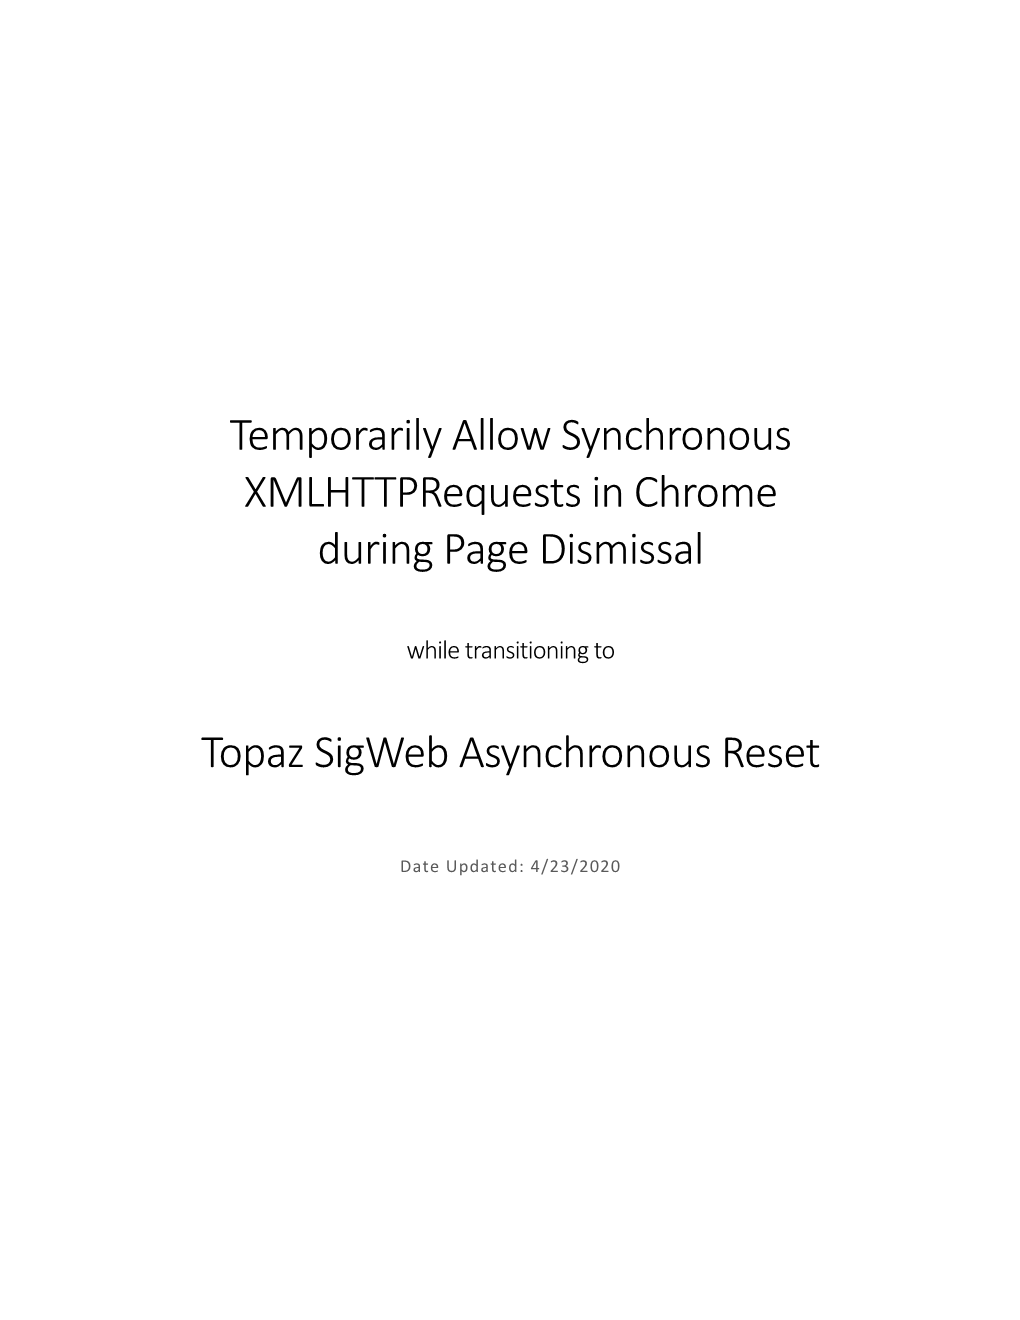 Temporarily Allow Synchronous Xmlhttprequests in Chrome During Page Dismissal